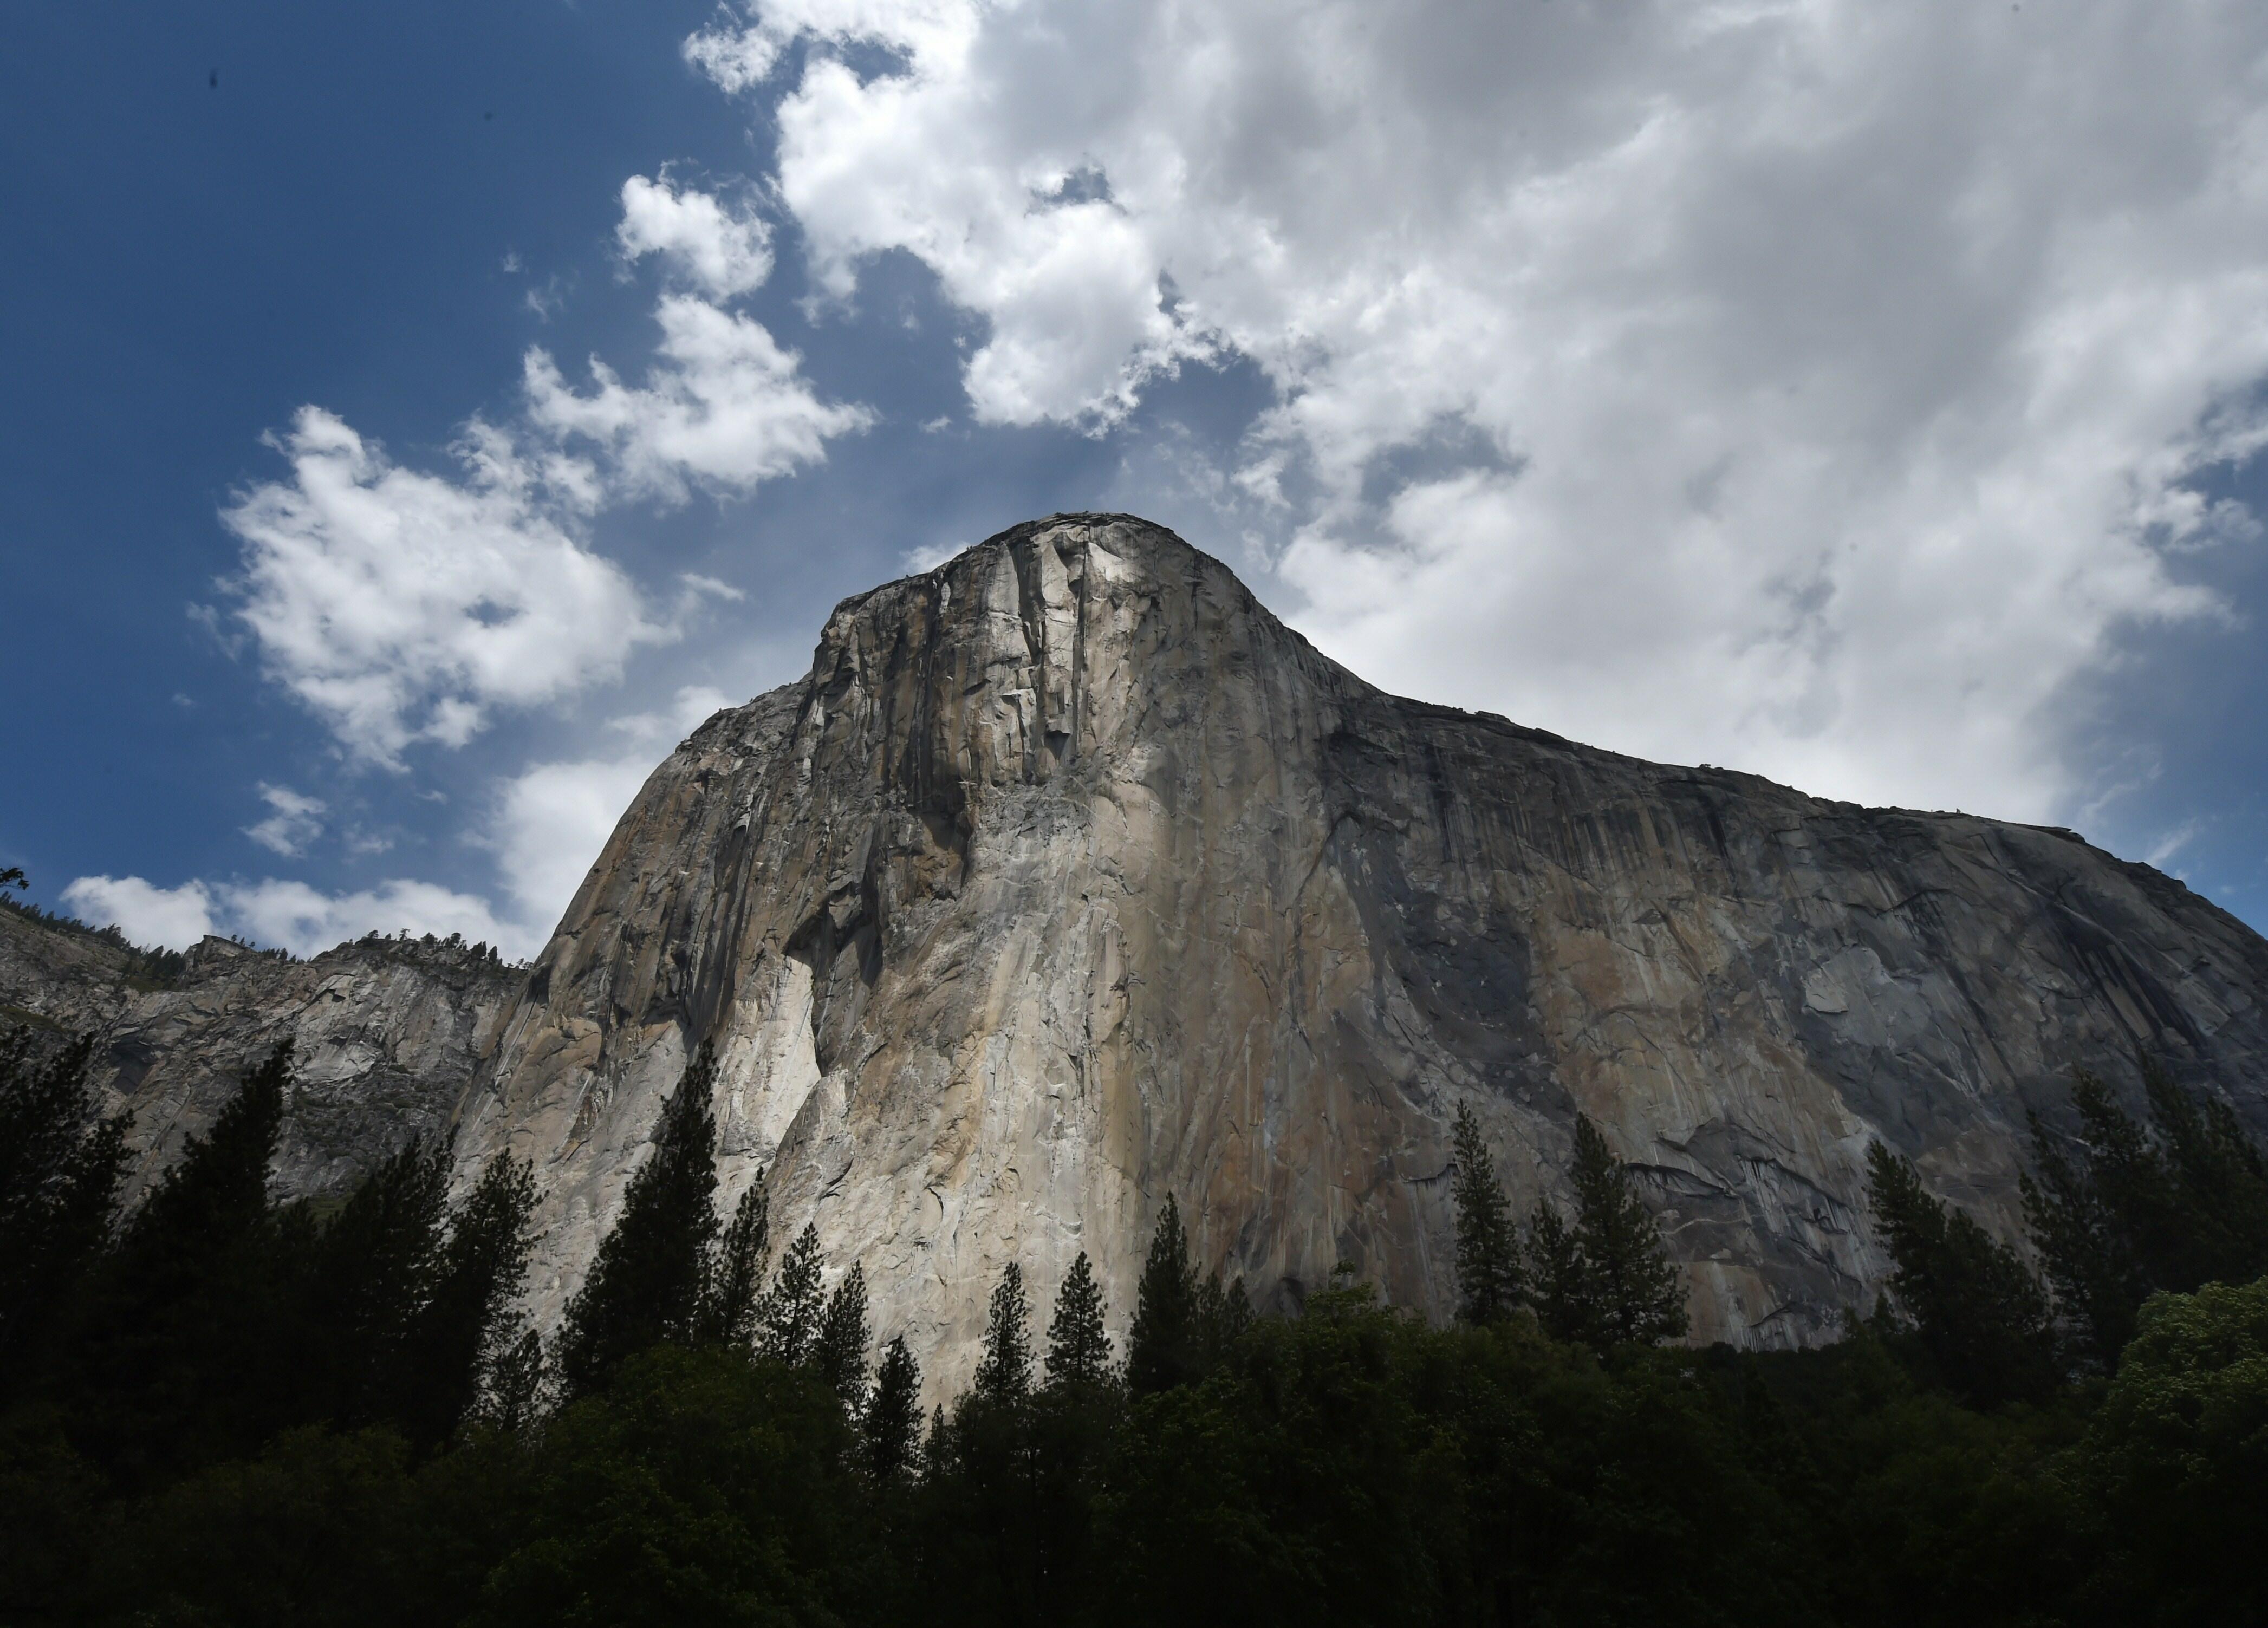 The El Capitan monolith in the Yosemite National Park in California on June 4, 2015.  It is one of America's most popular natural wonders. But even Yosemite National Park cannot escape the drought ravaging California, now in its fourth year and fueling gr